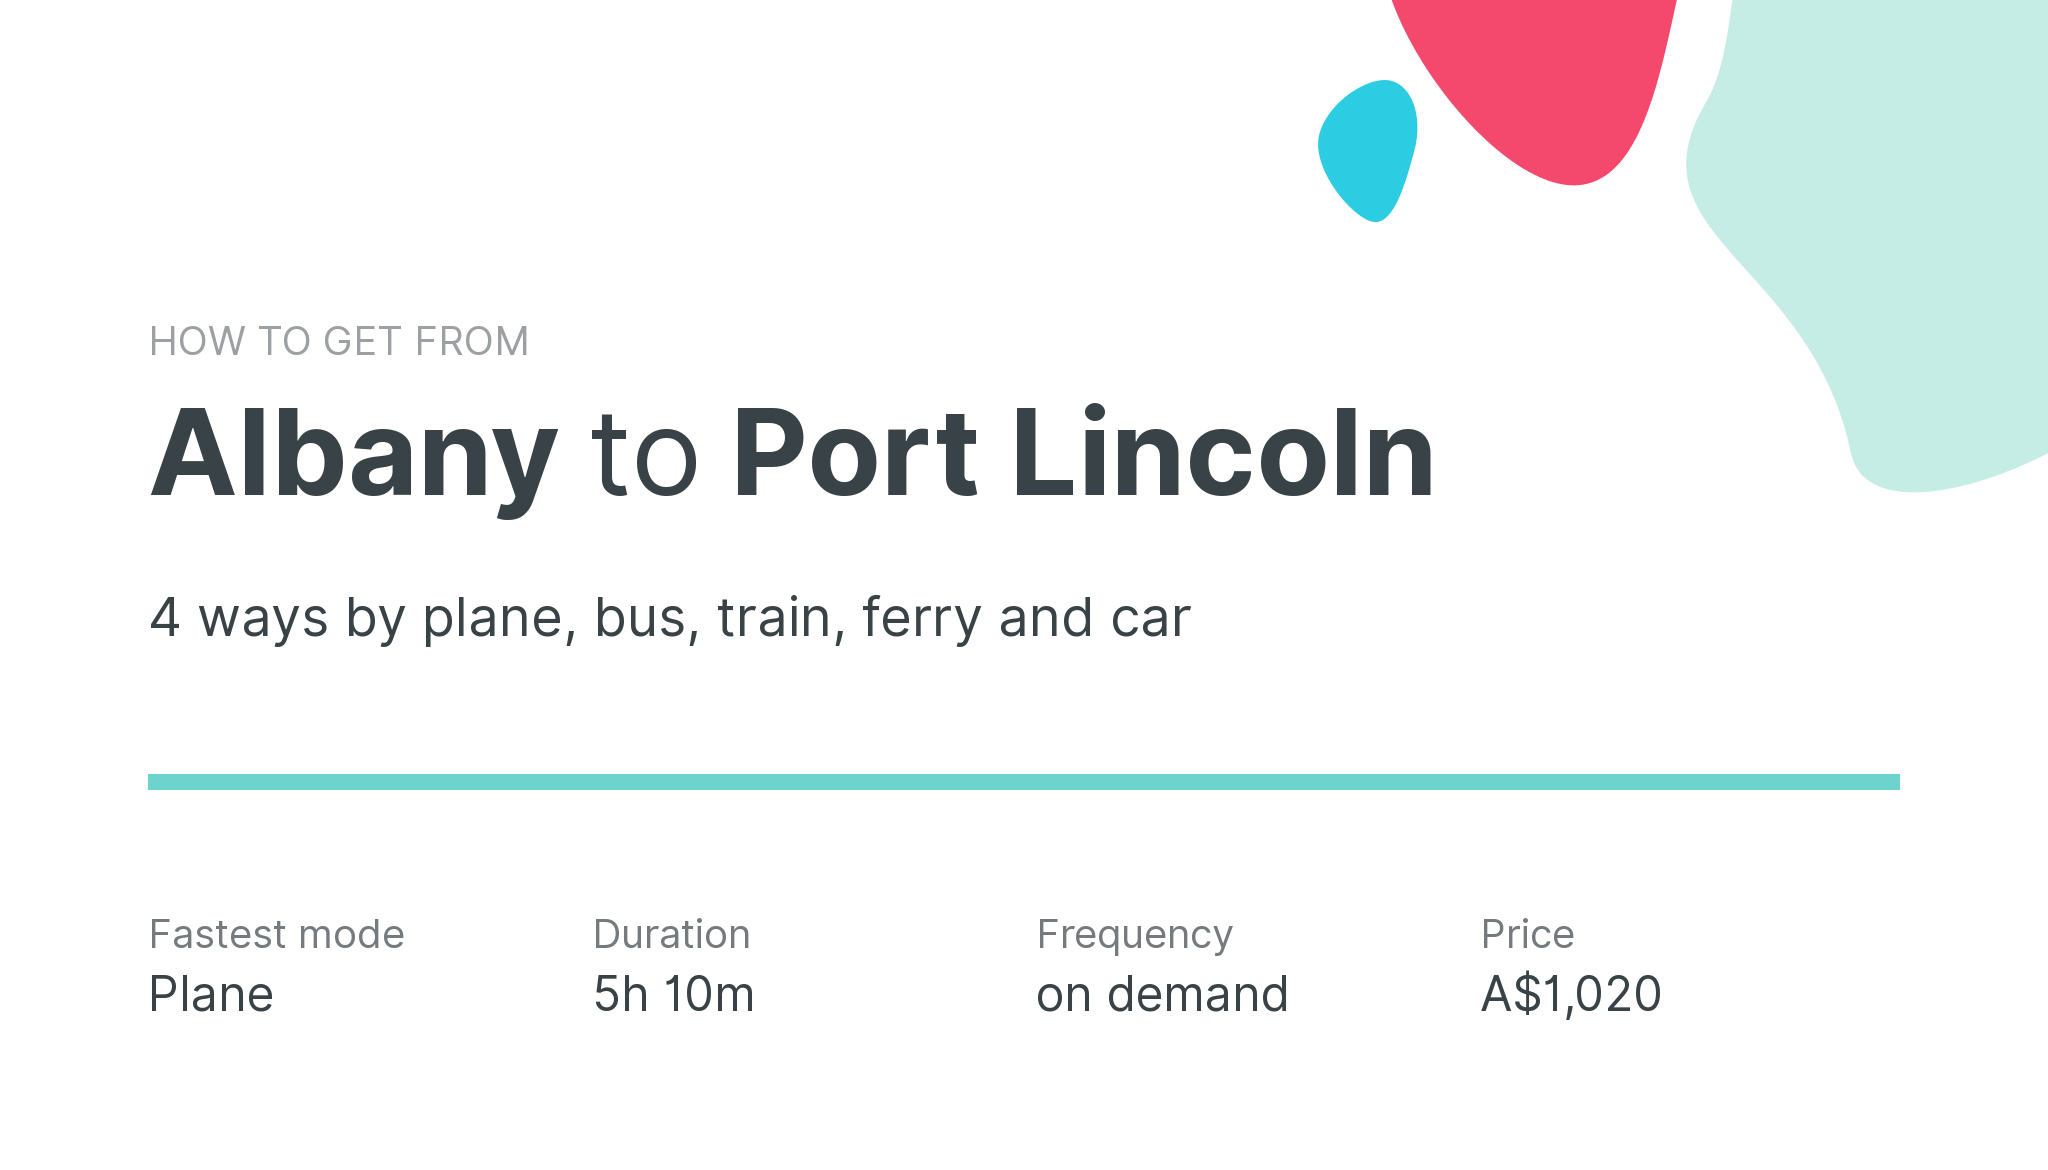 How do I get from Albany to Port Lincoln